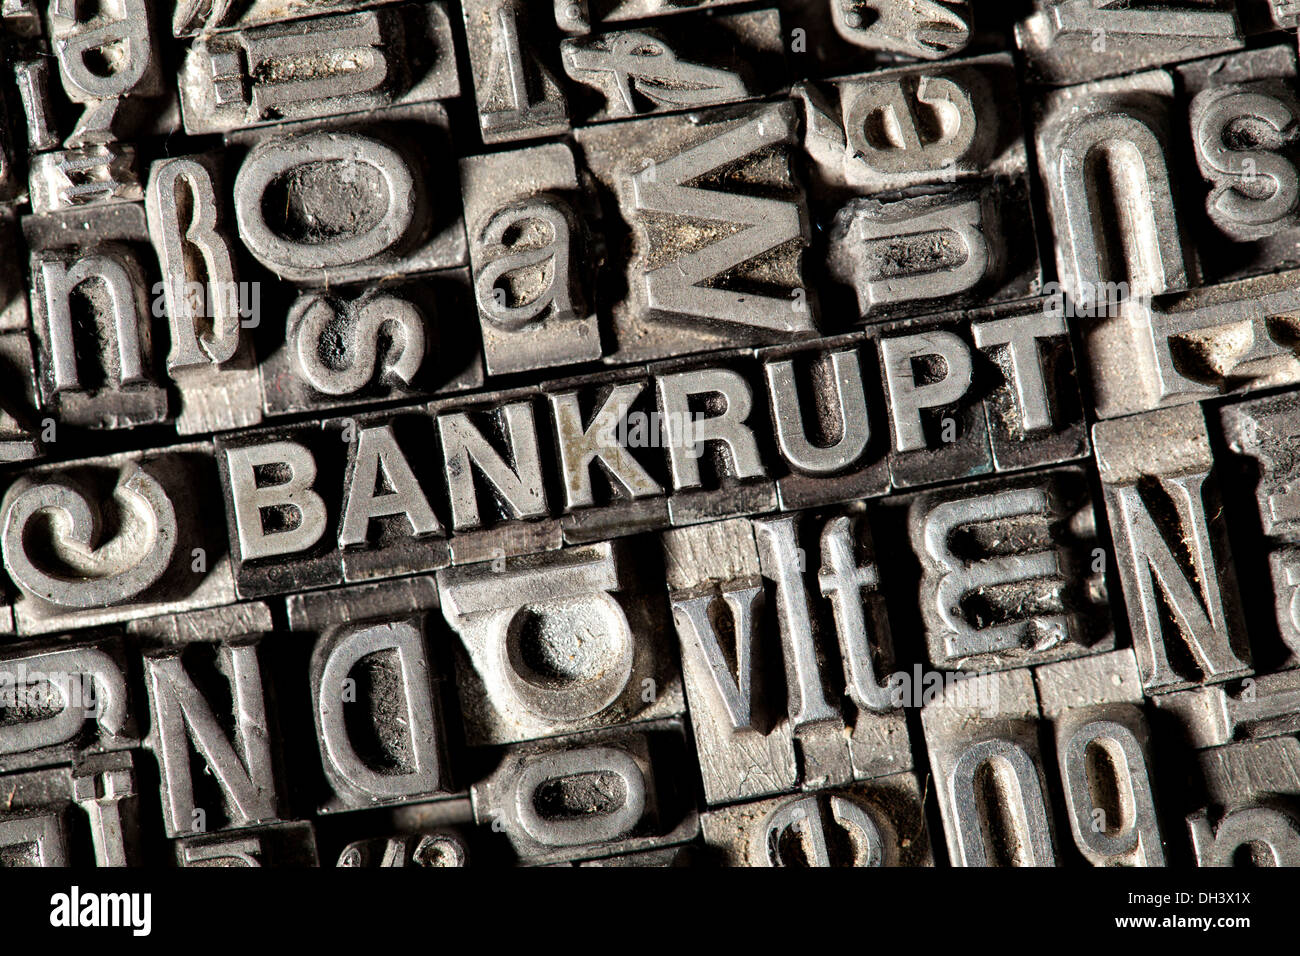 Old lead letters forming the word 'BANKRUPT' Stock Photo